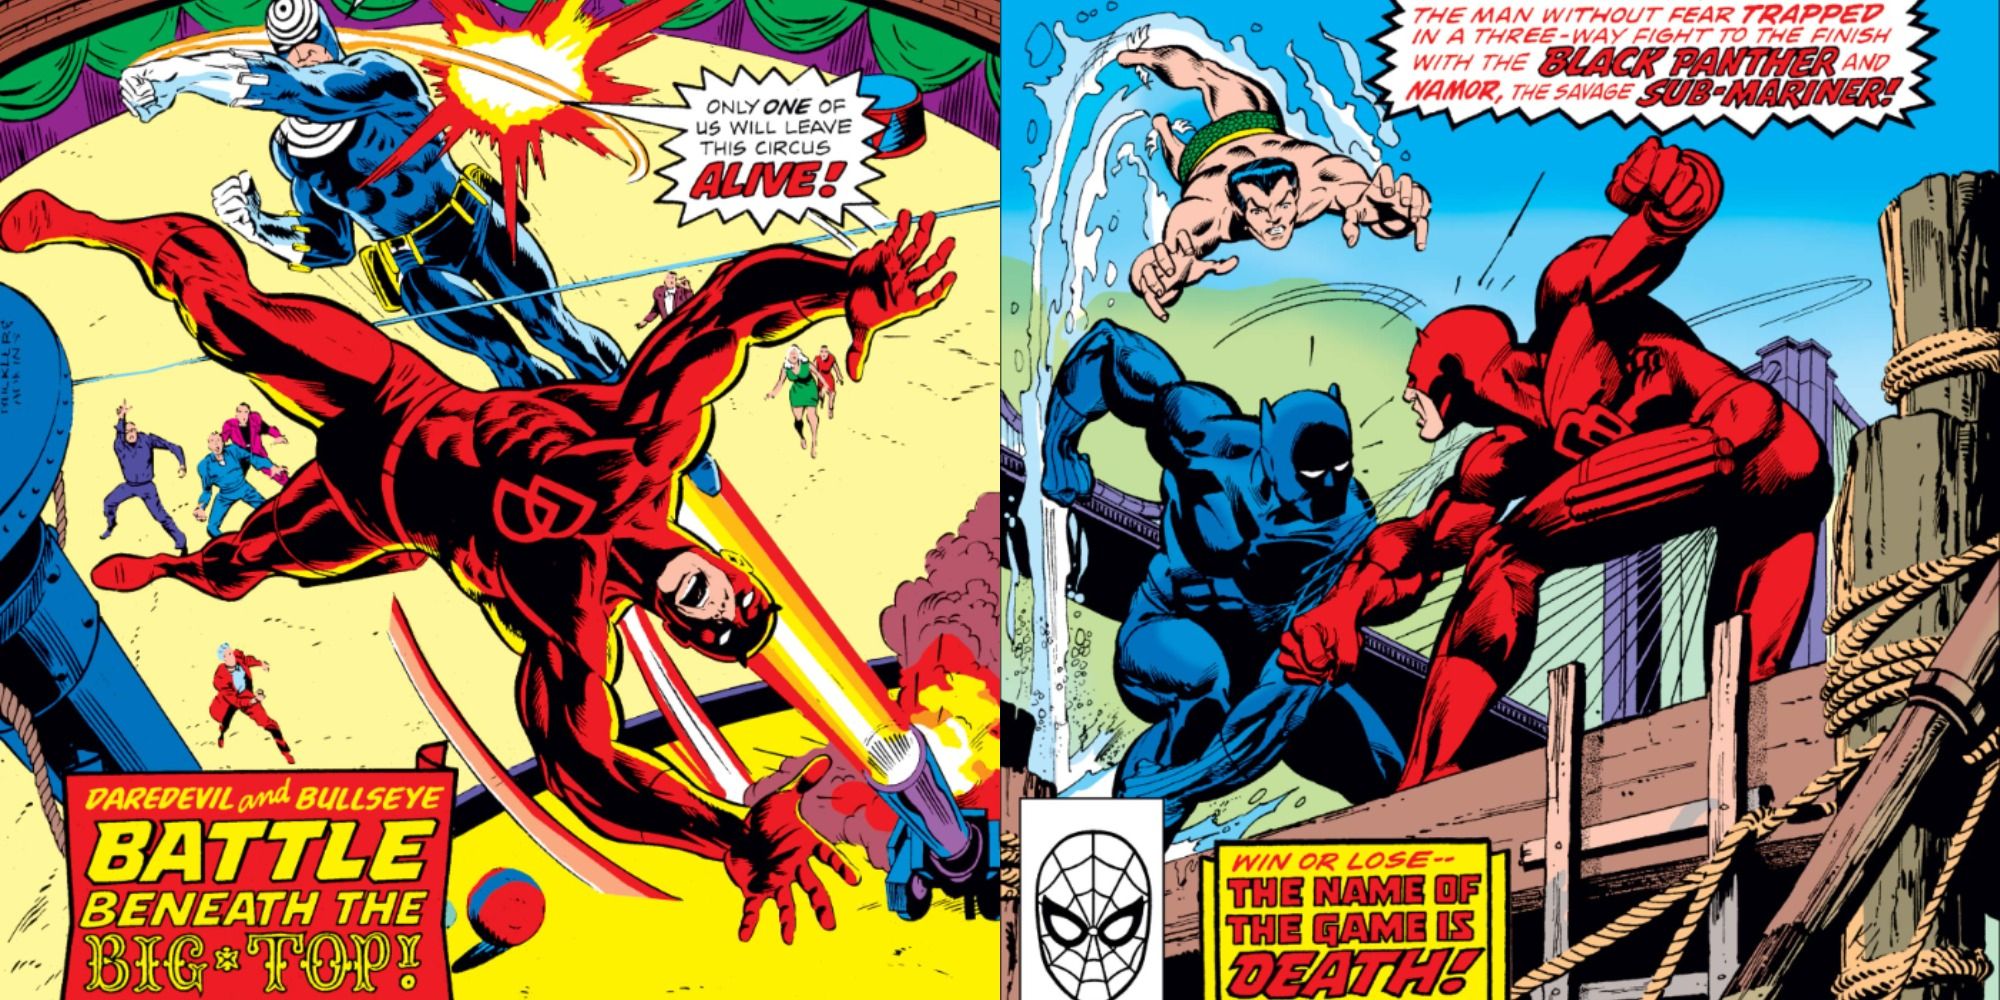 SPlit image showing covers for Daredevil #132 and Daredevil Annual #4